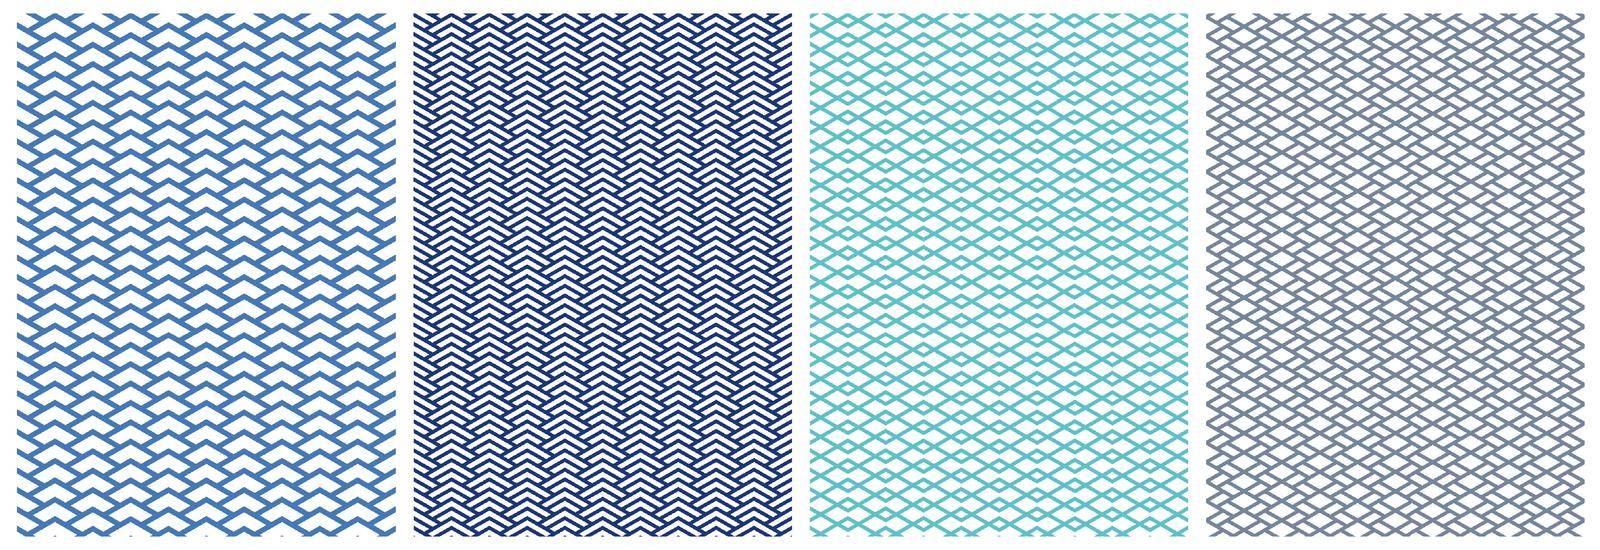 Geometry seamless line grid pattern on white background. Simple geometric motive for cloth, wrapping paper, cover design by Olechka